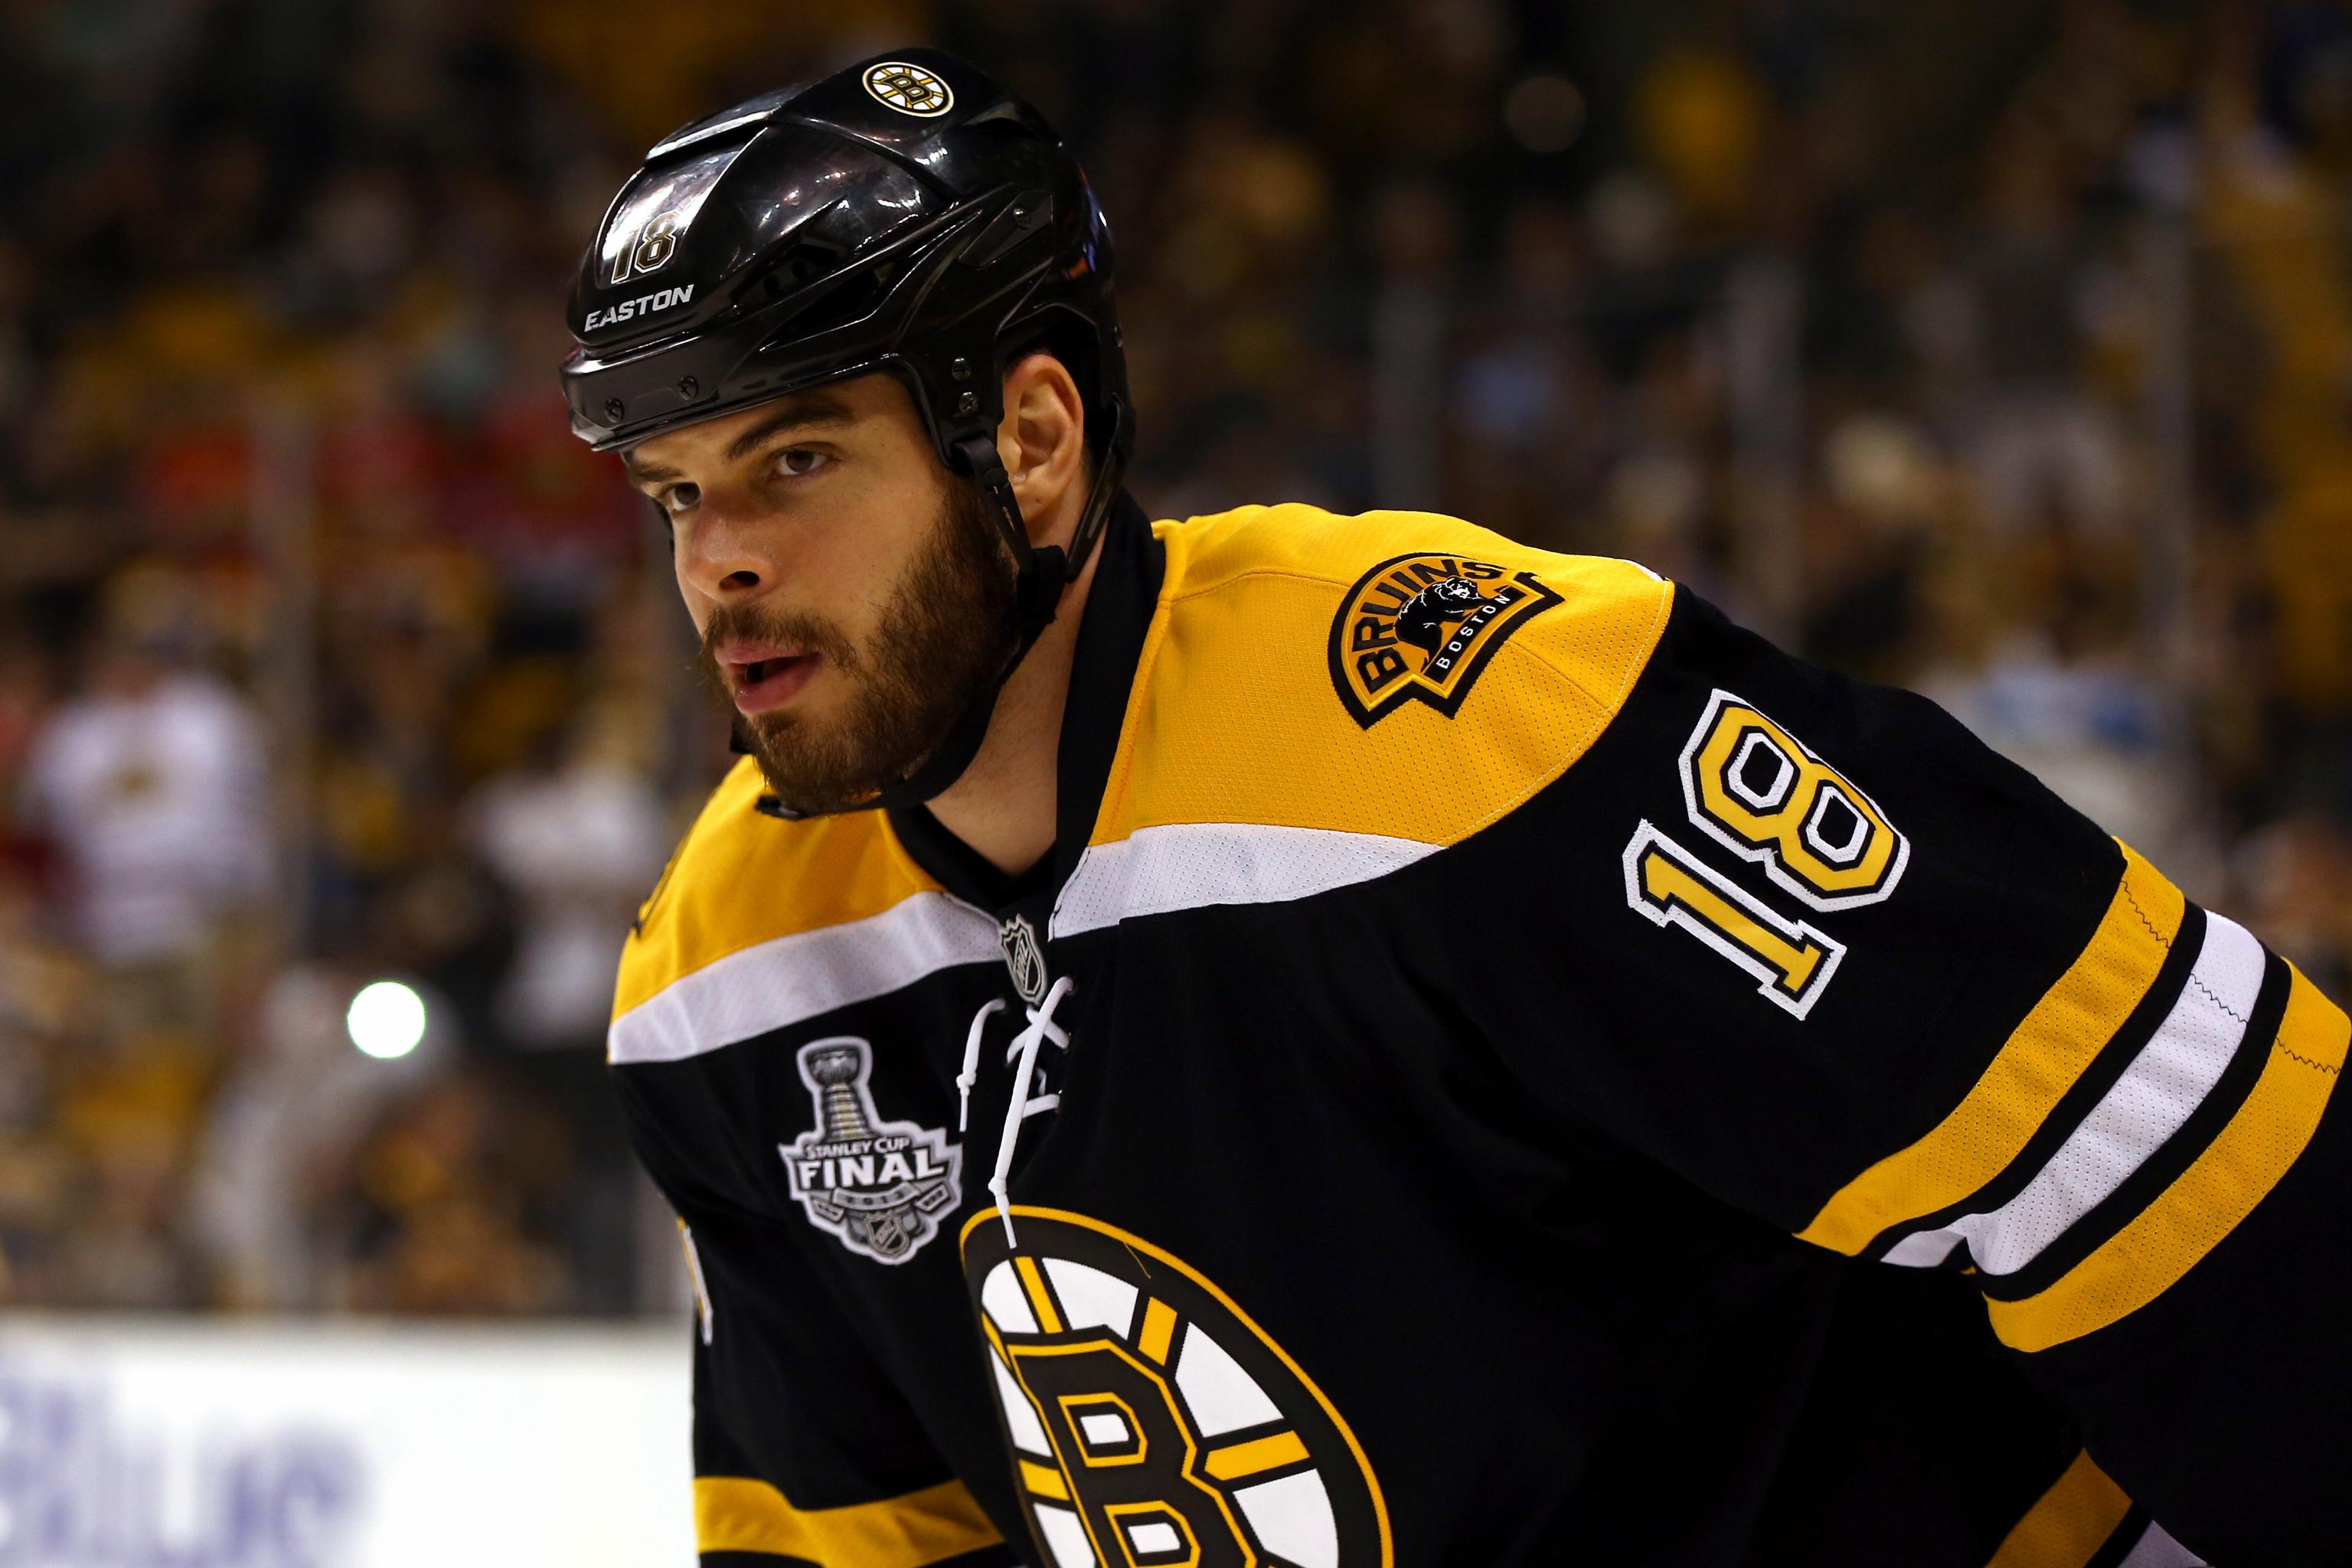 Nathan Horton signs with Blue Jackets